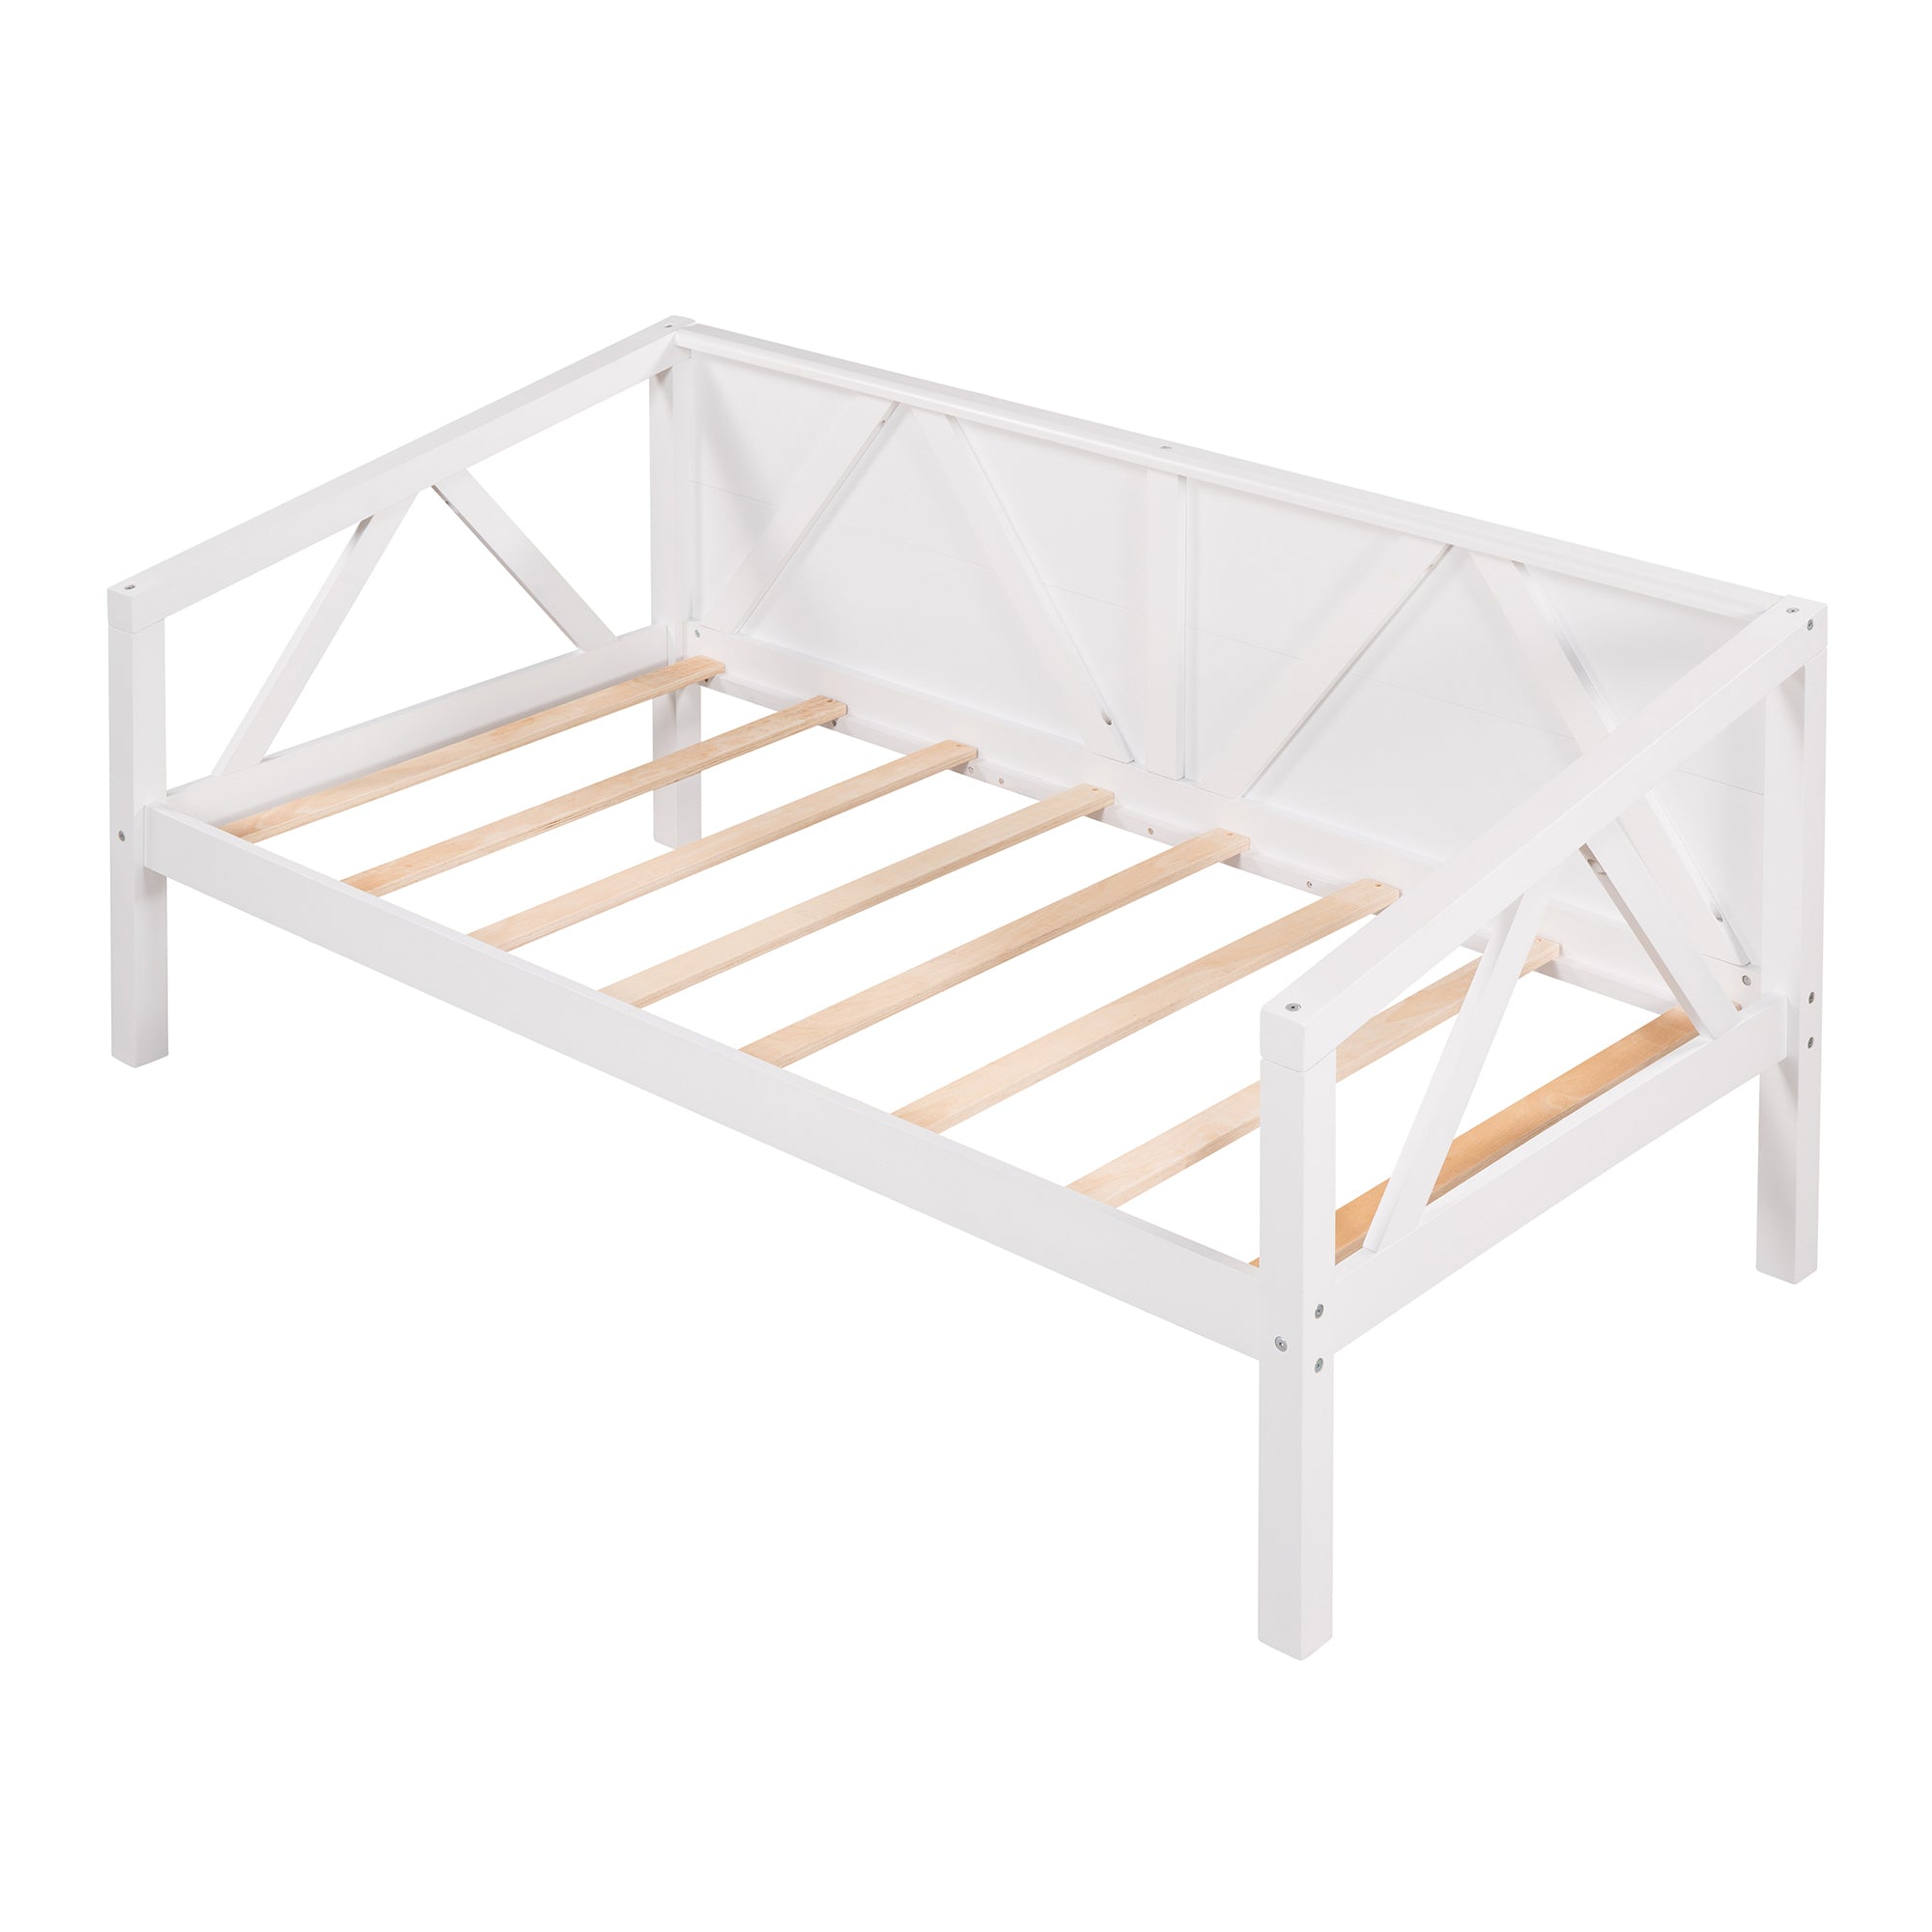 Twin size Daybed, Wood Slat Support, White white-solid wood